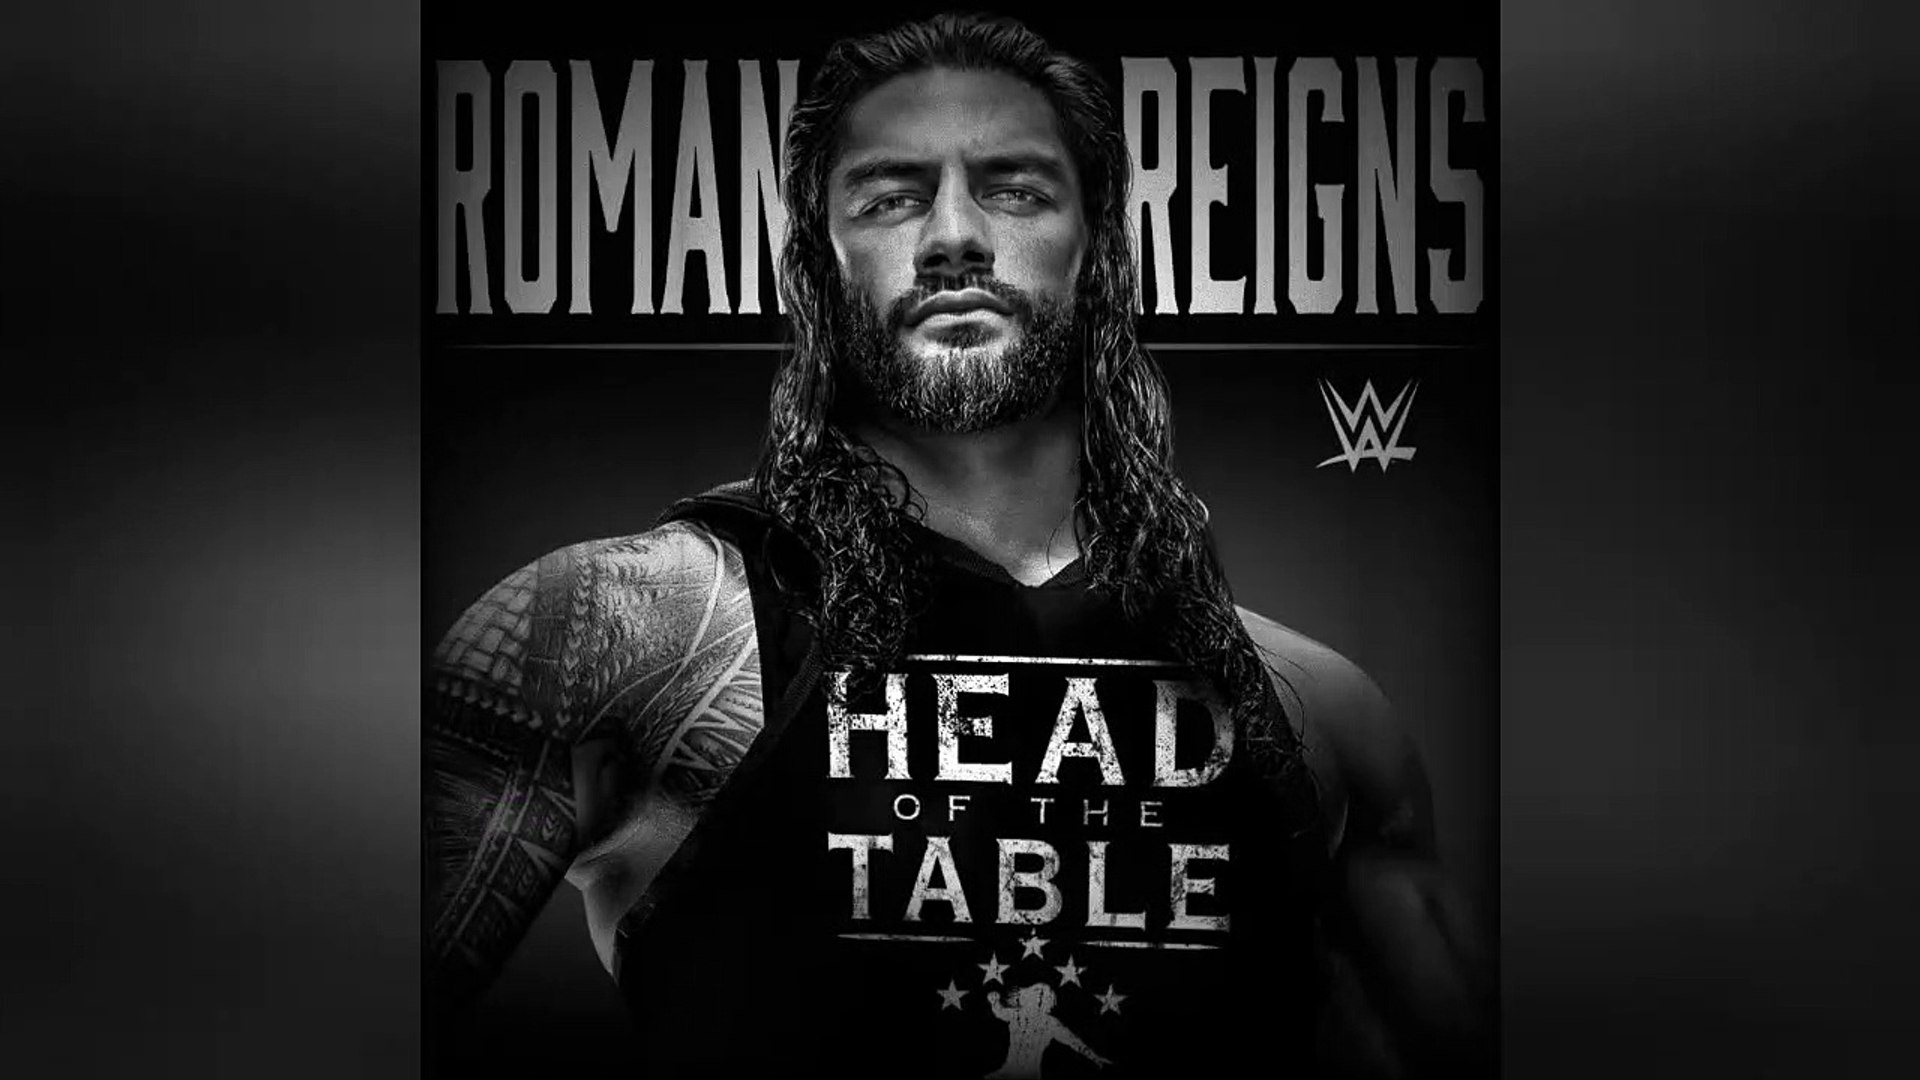 Roman Reigns Of The Table (Entrance Theme)